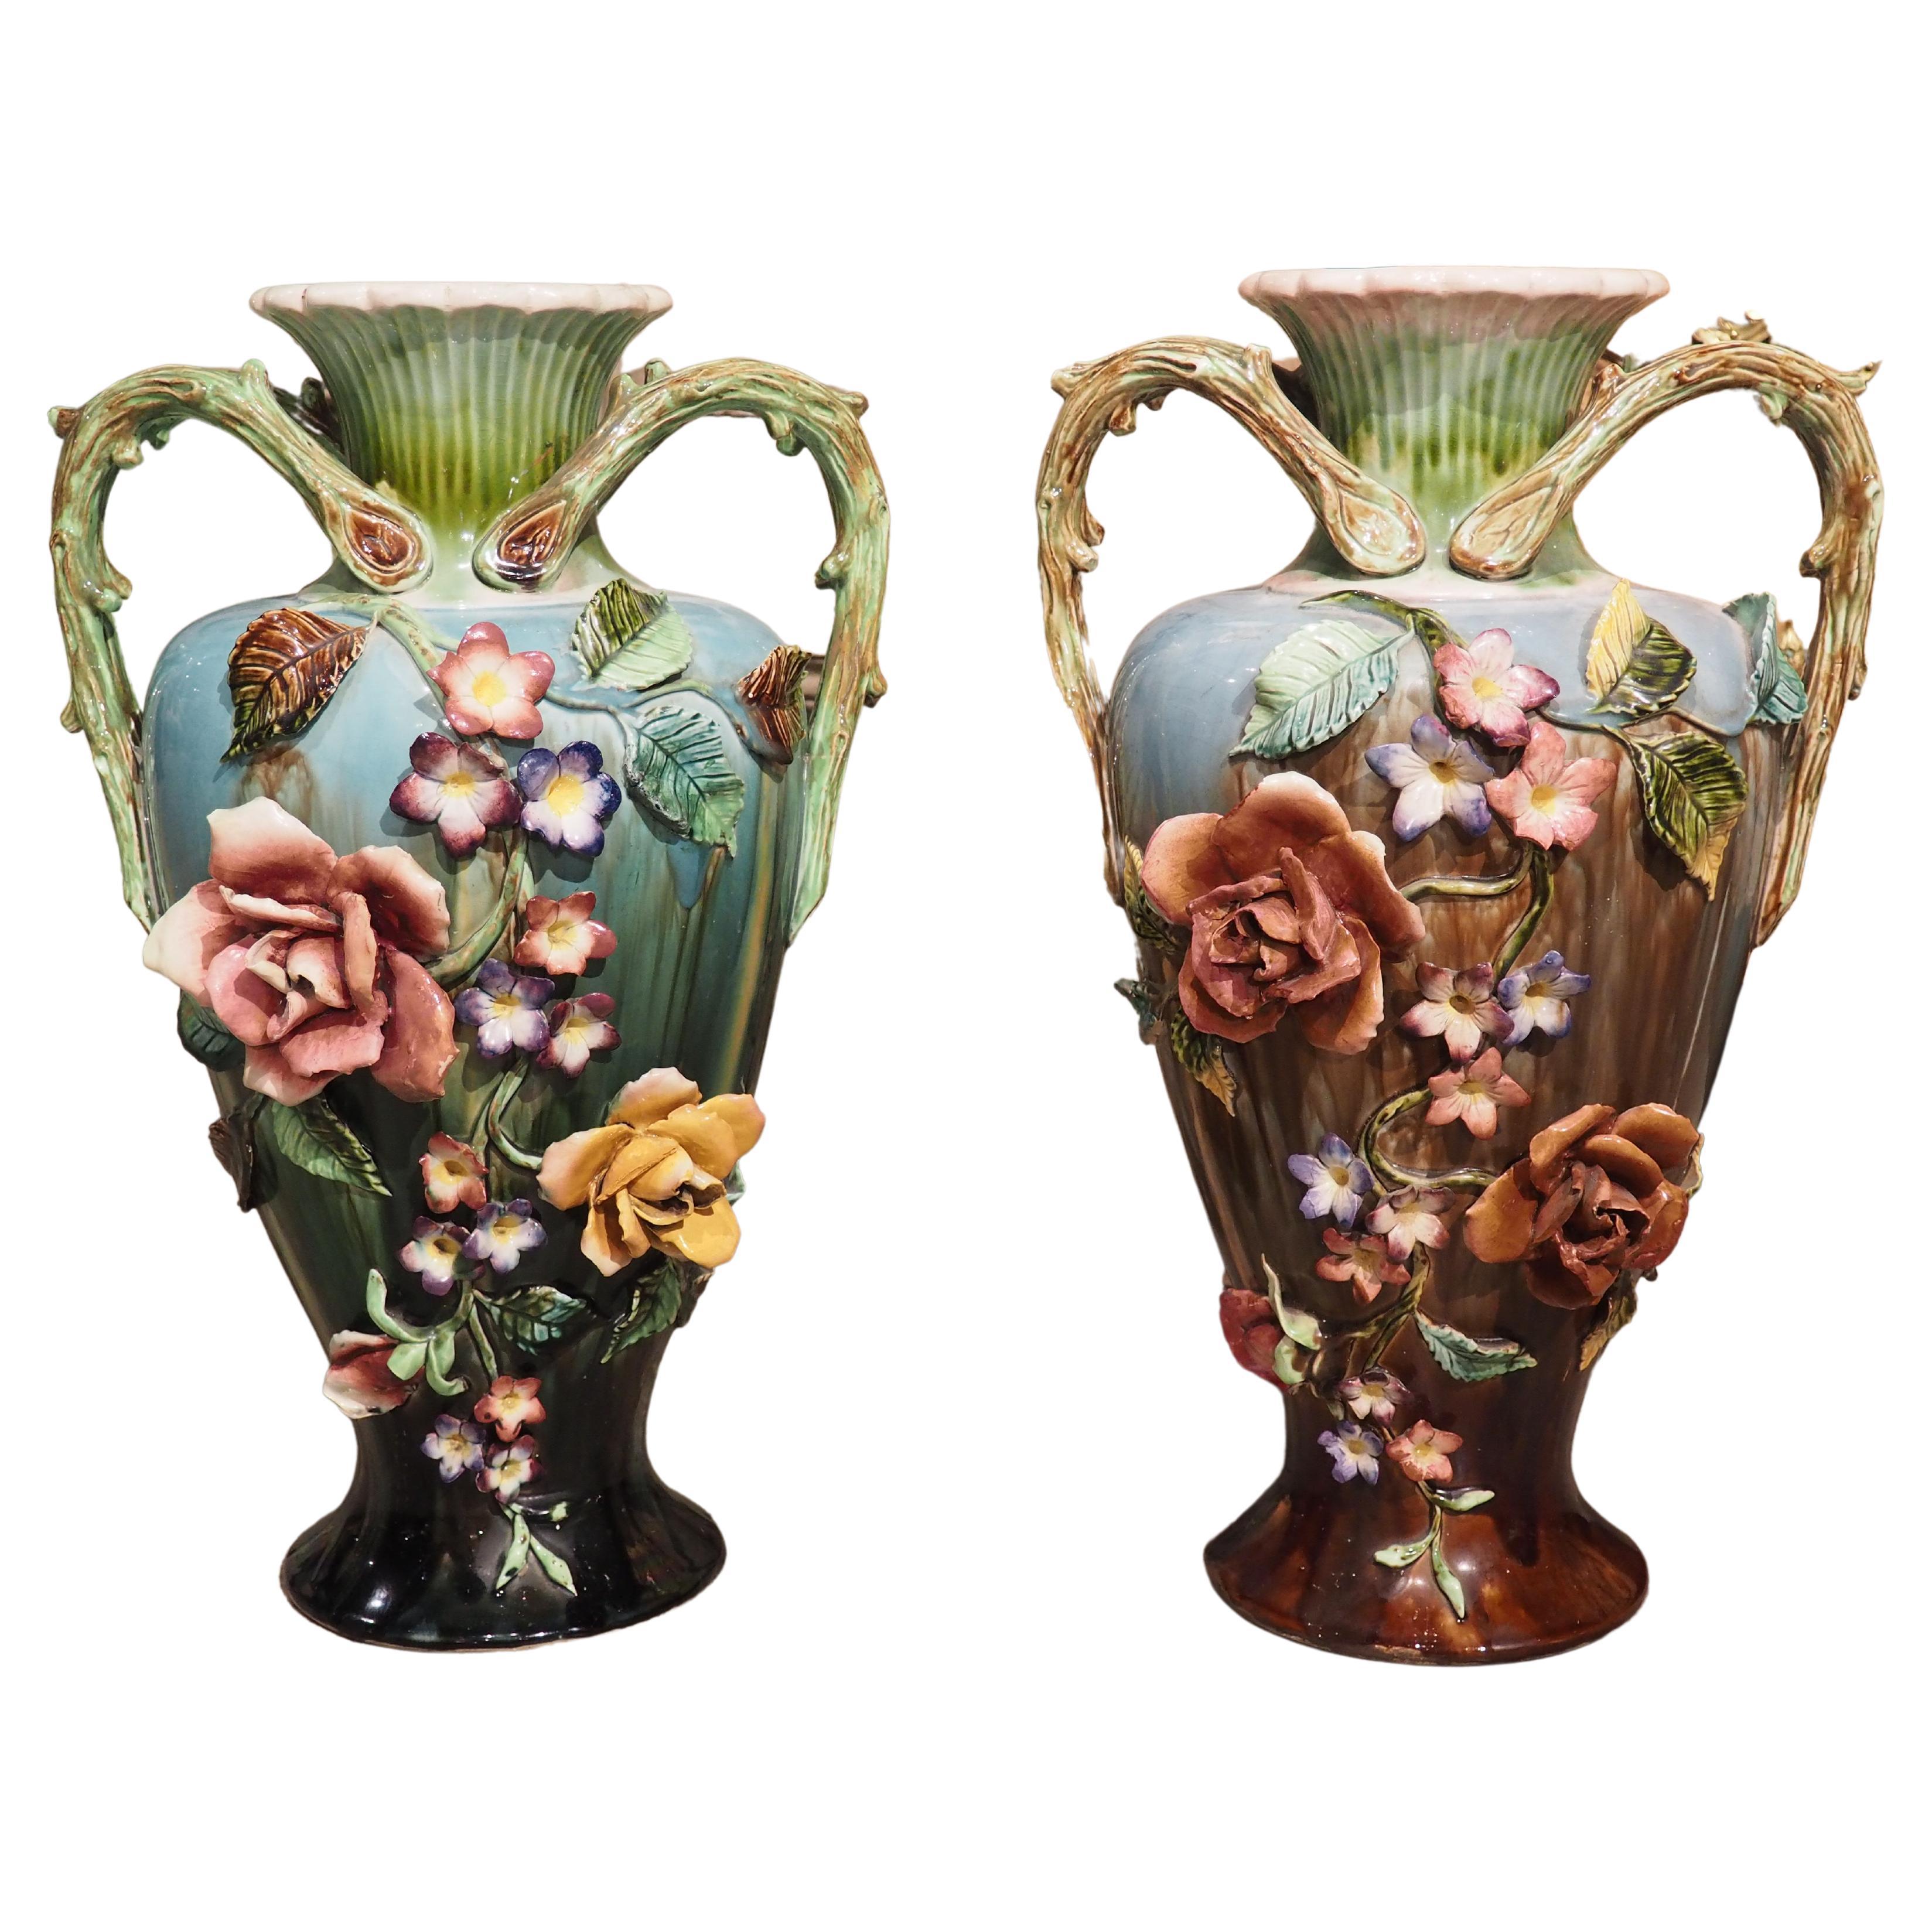 Pair of Large Antique French Art Nouveau Period Gros Relief Barbotine Vases